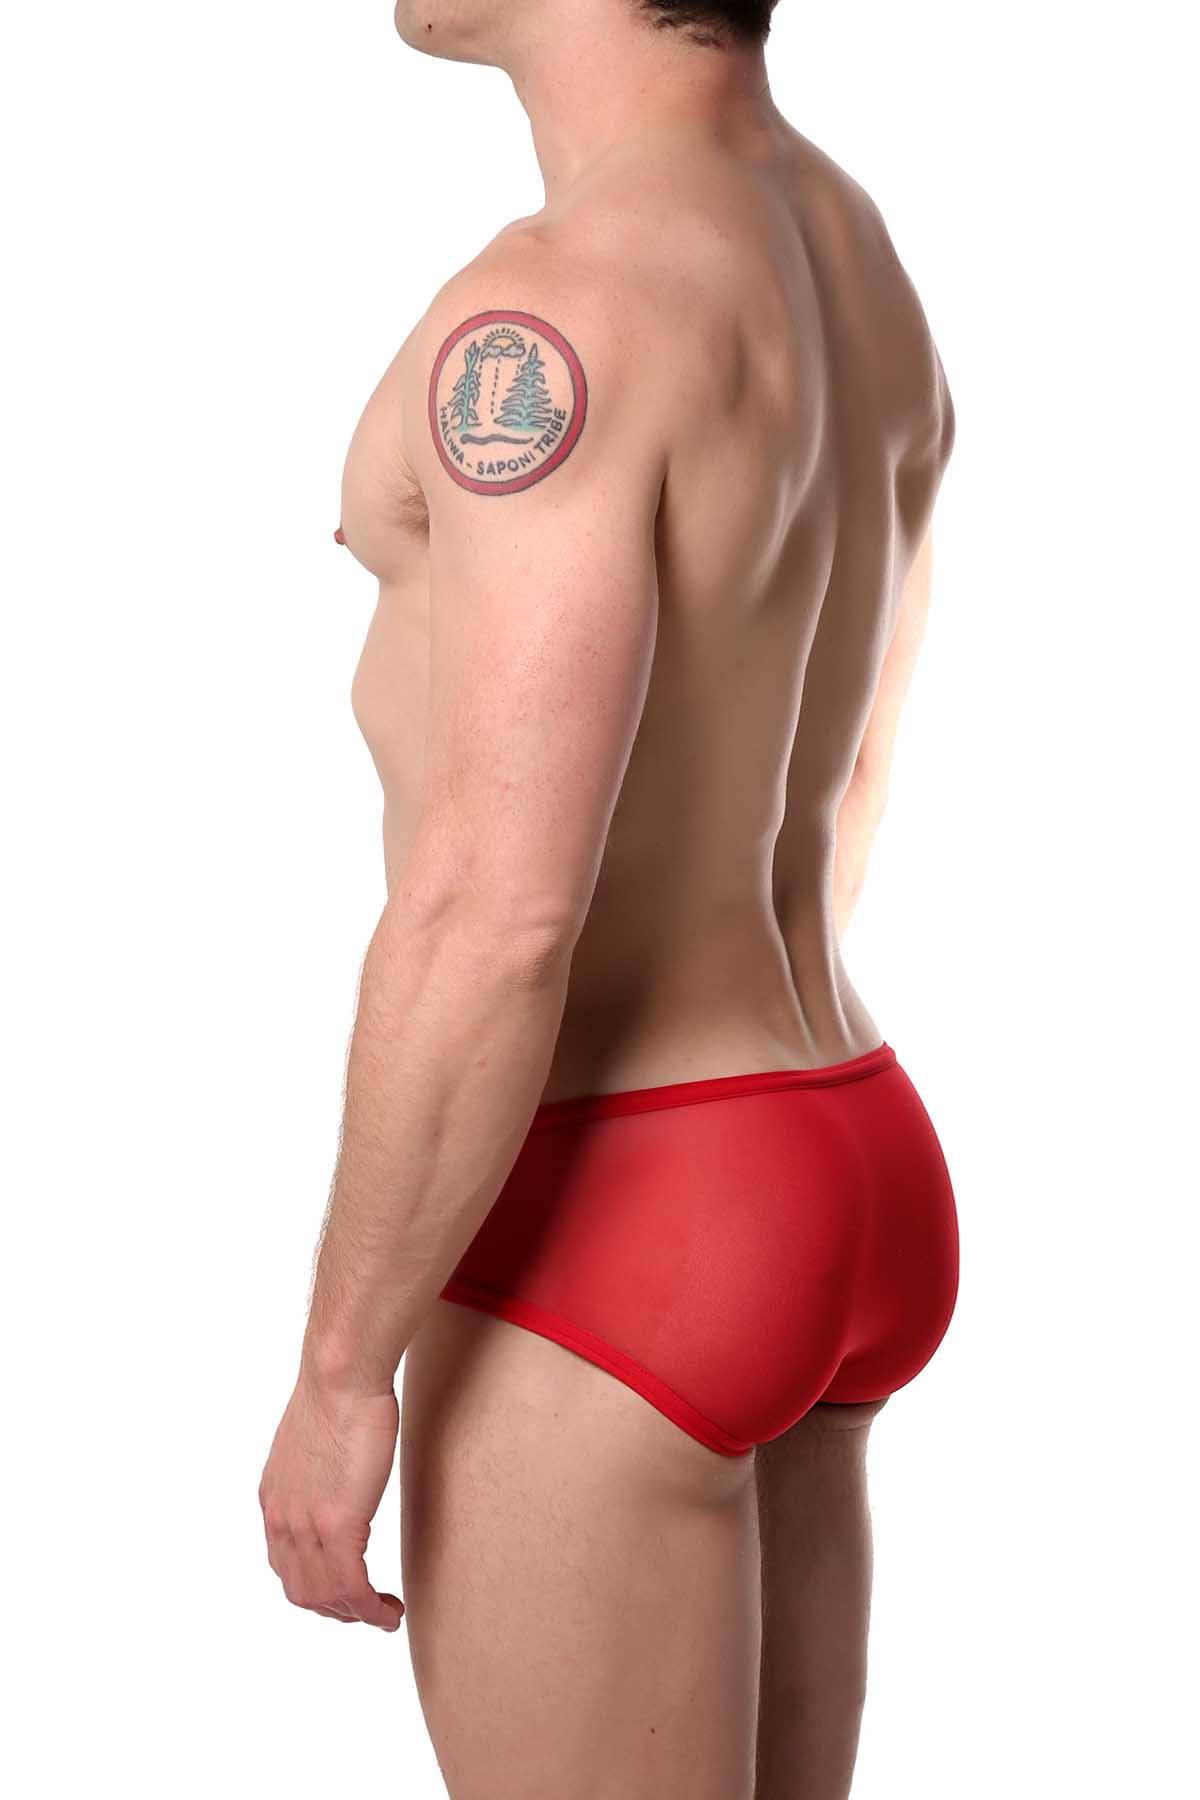 Cocksox Emperor-Red Contour-Pouch Sheer Sports Brief